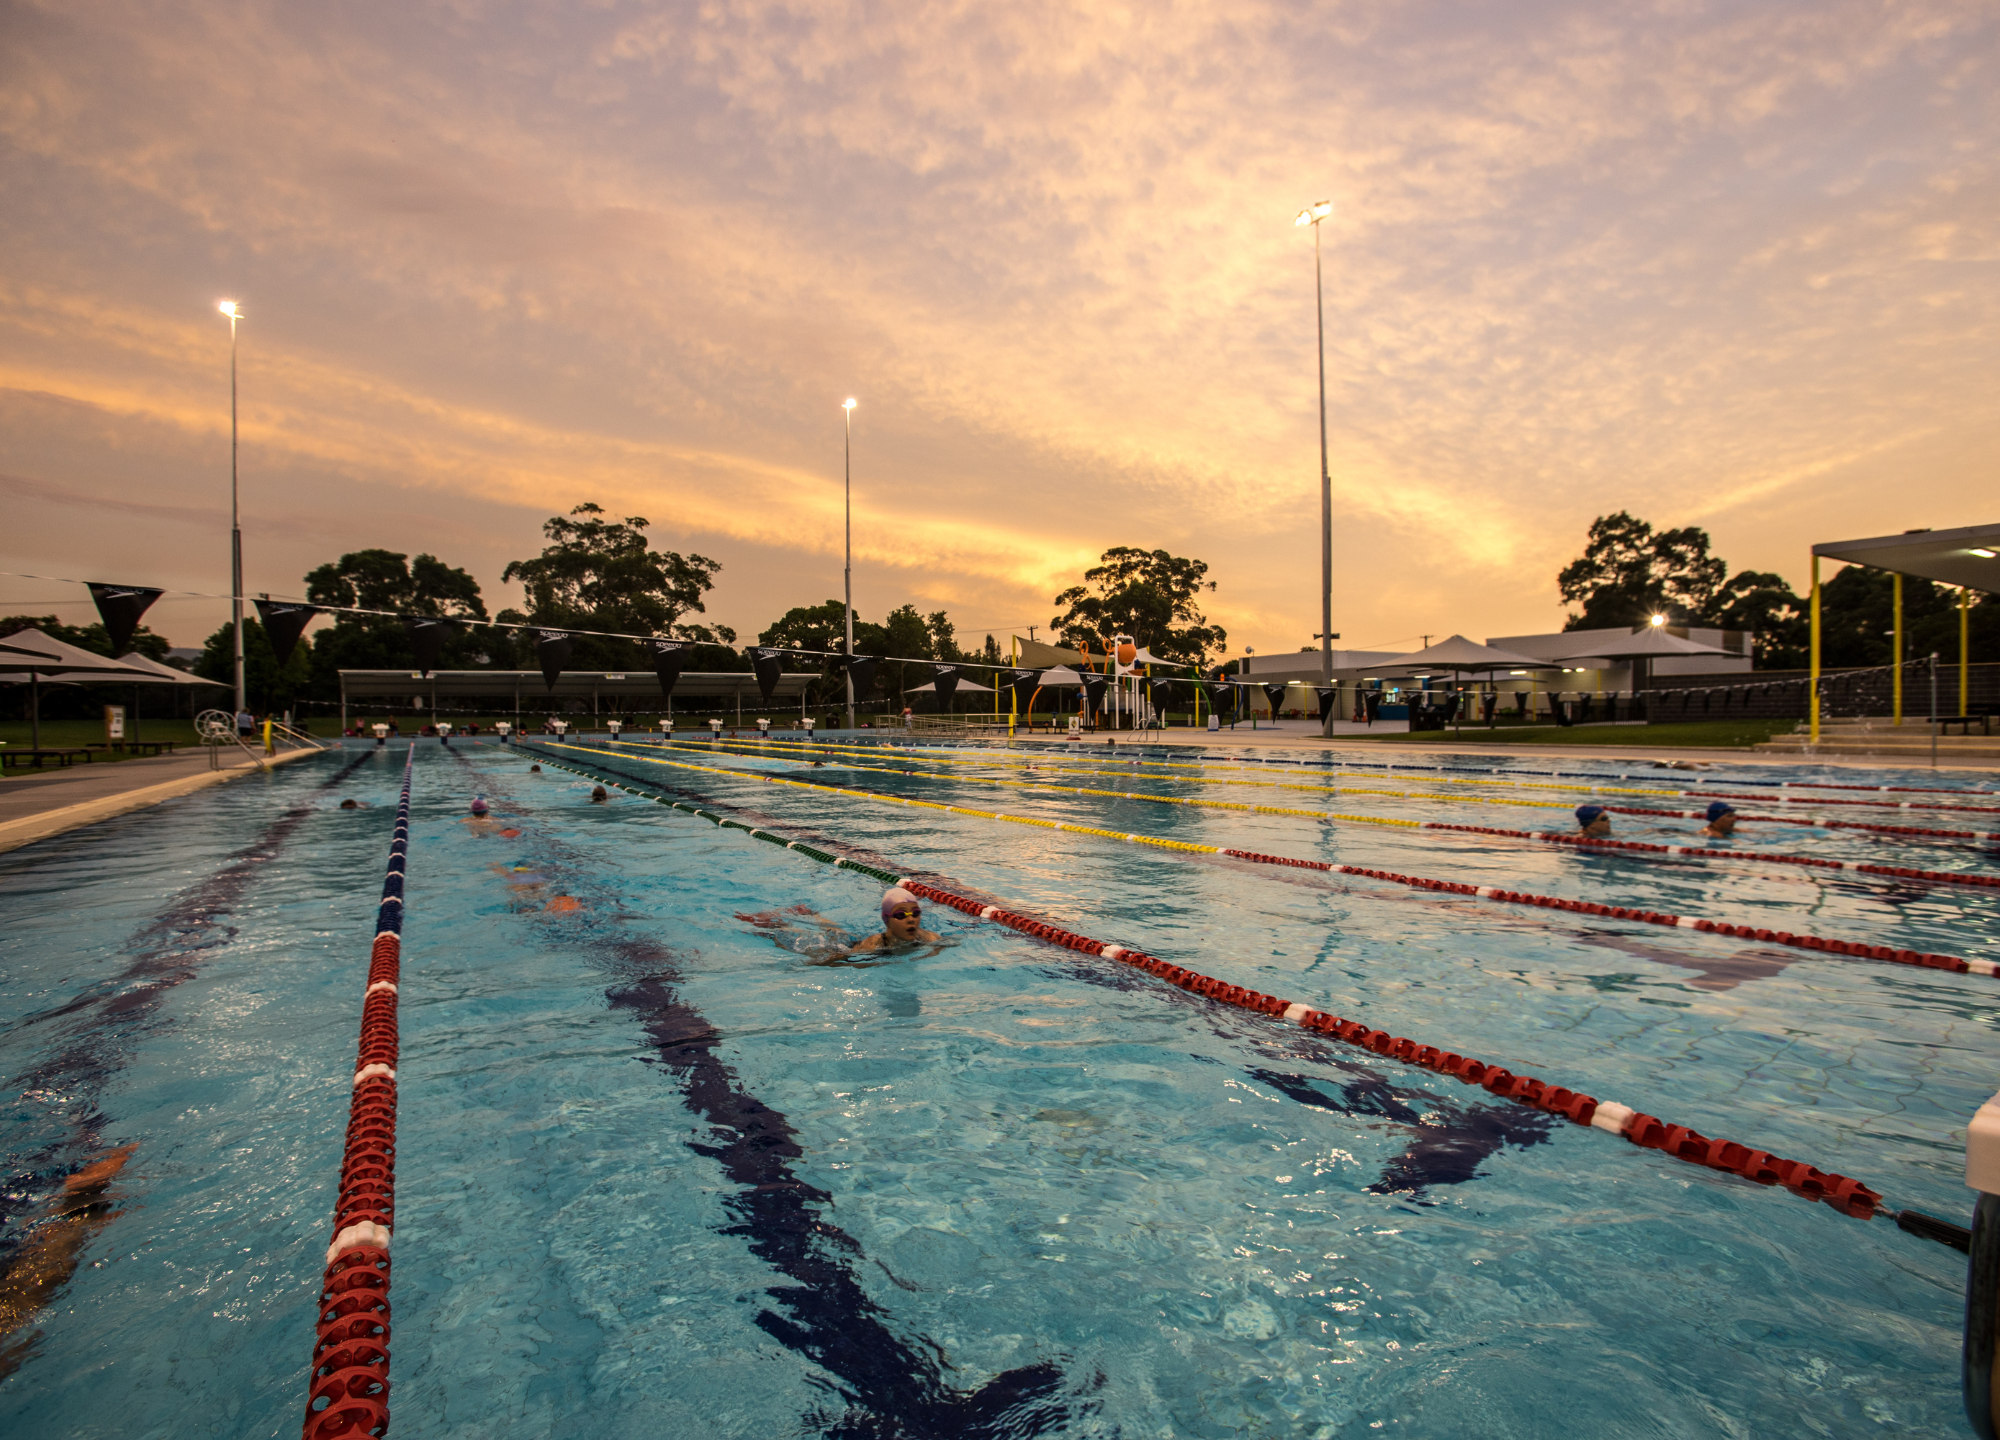 A photo of the pool at Nowra Aquatic Park with people swimming in it at dusk